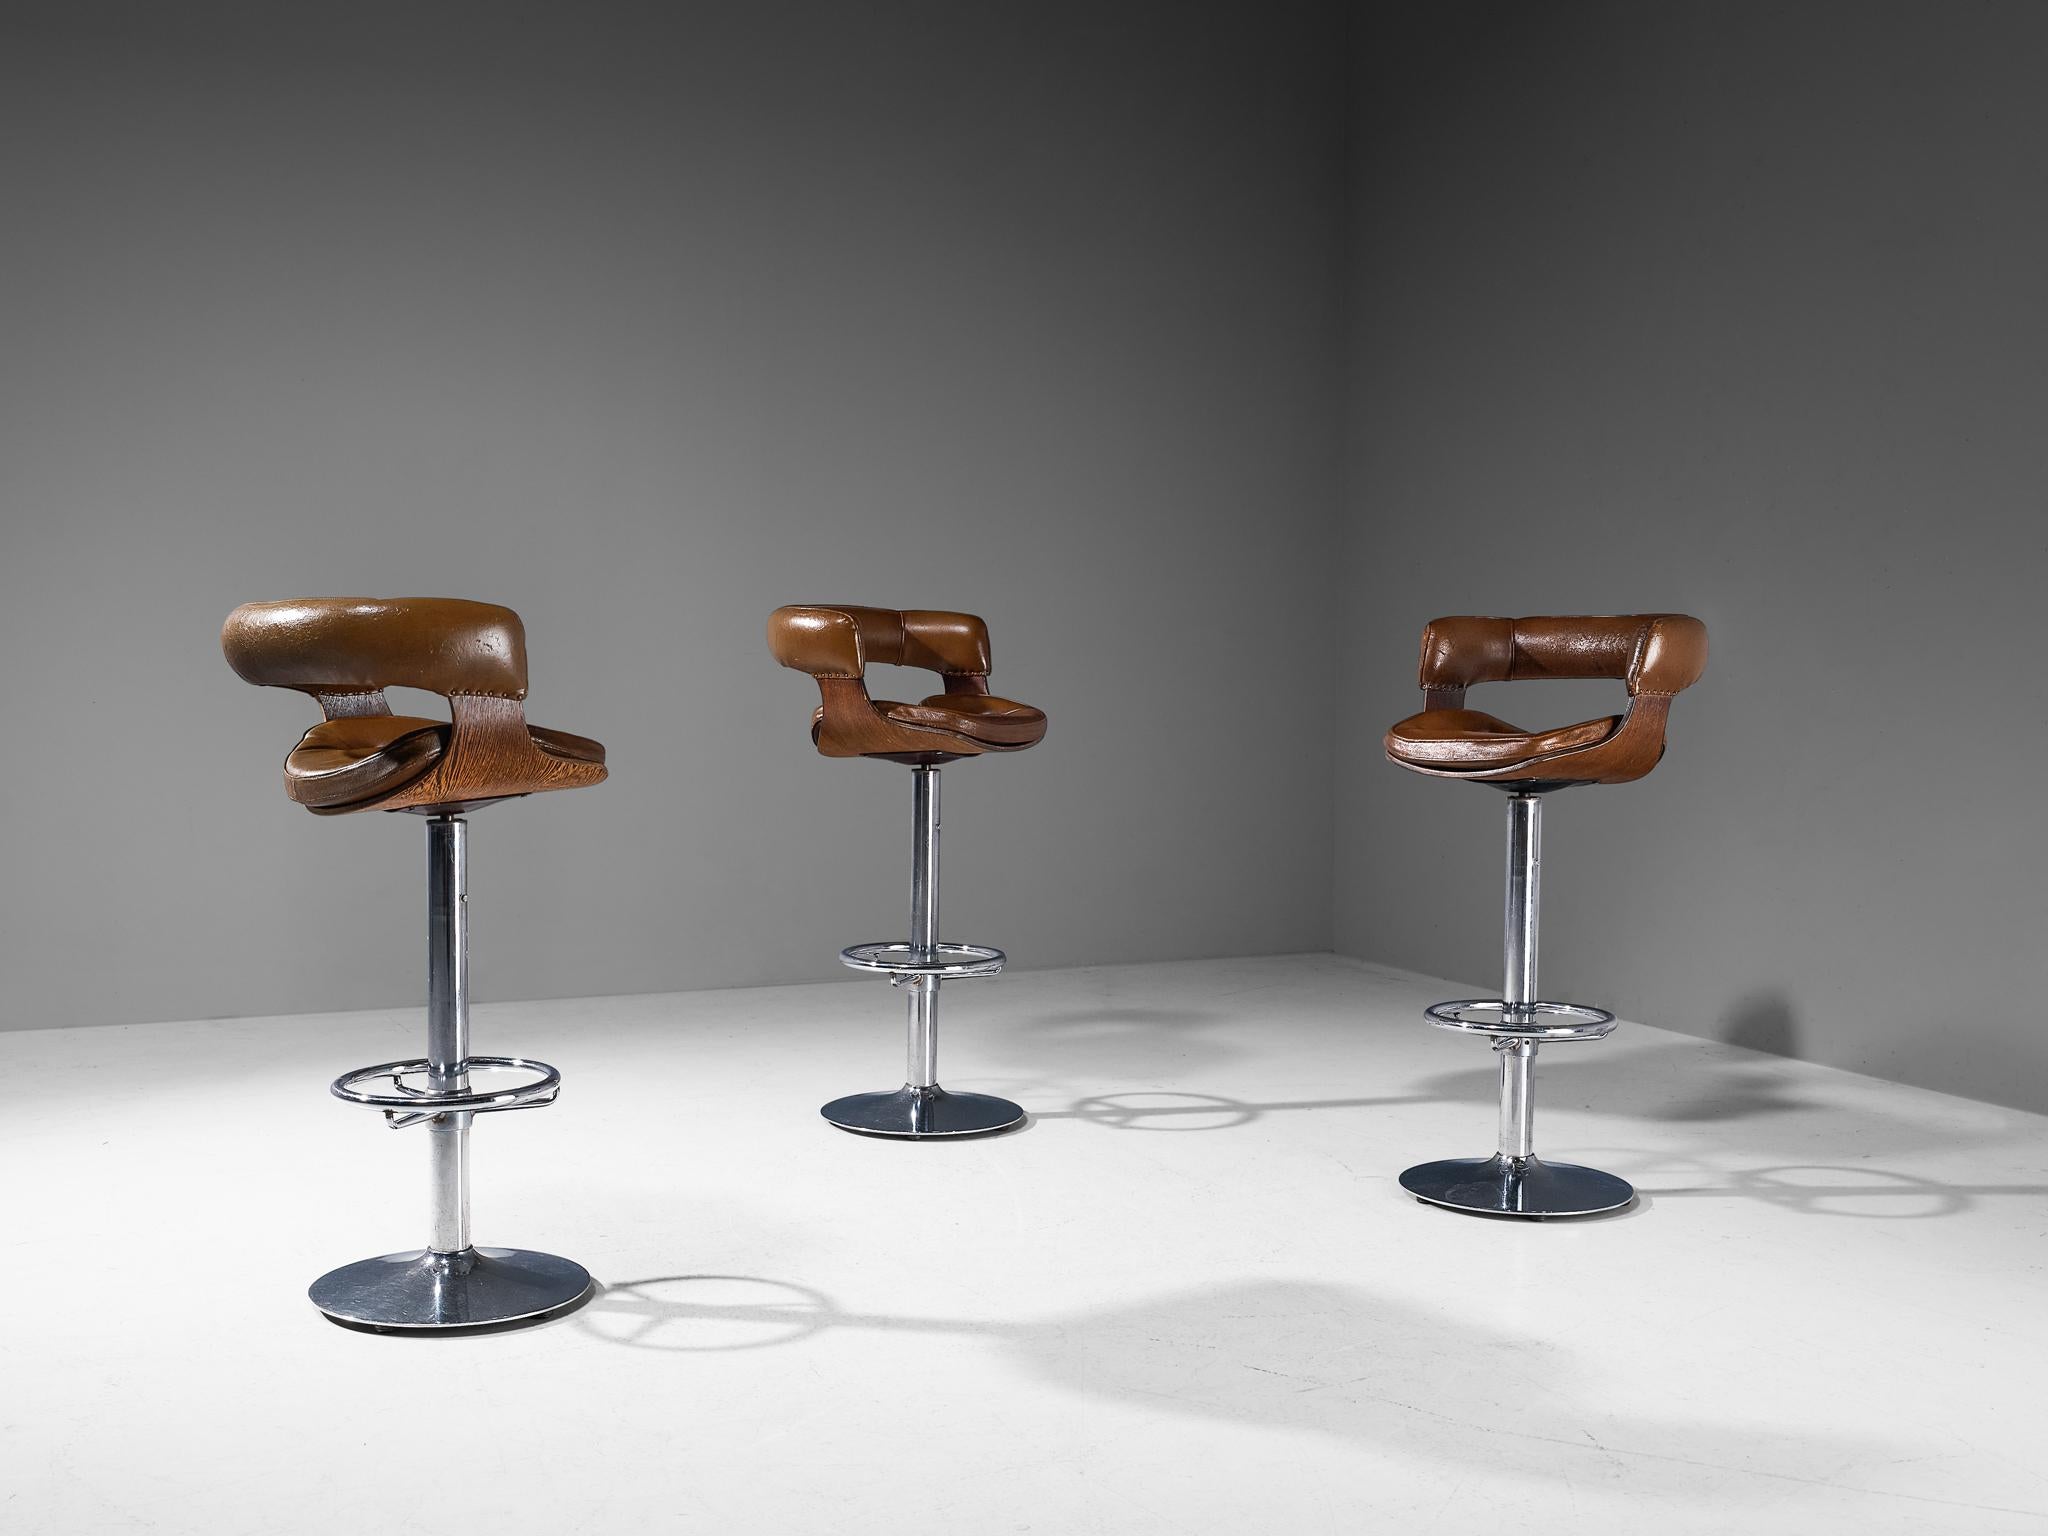 Set of three barstools, chrome-plated metal, wengé, leather, Europe, 1970s

Highly comfortable high barstools in leather upholstery. The backrest provides support for the back, and therefore a pleasant seating experience is guaranteed. The